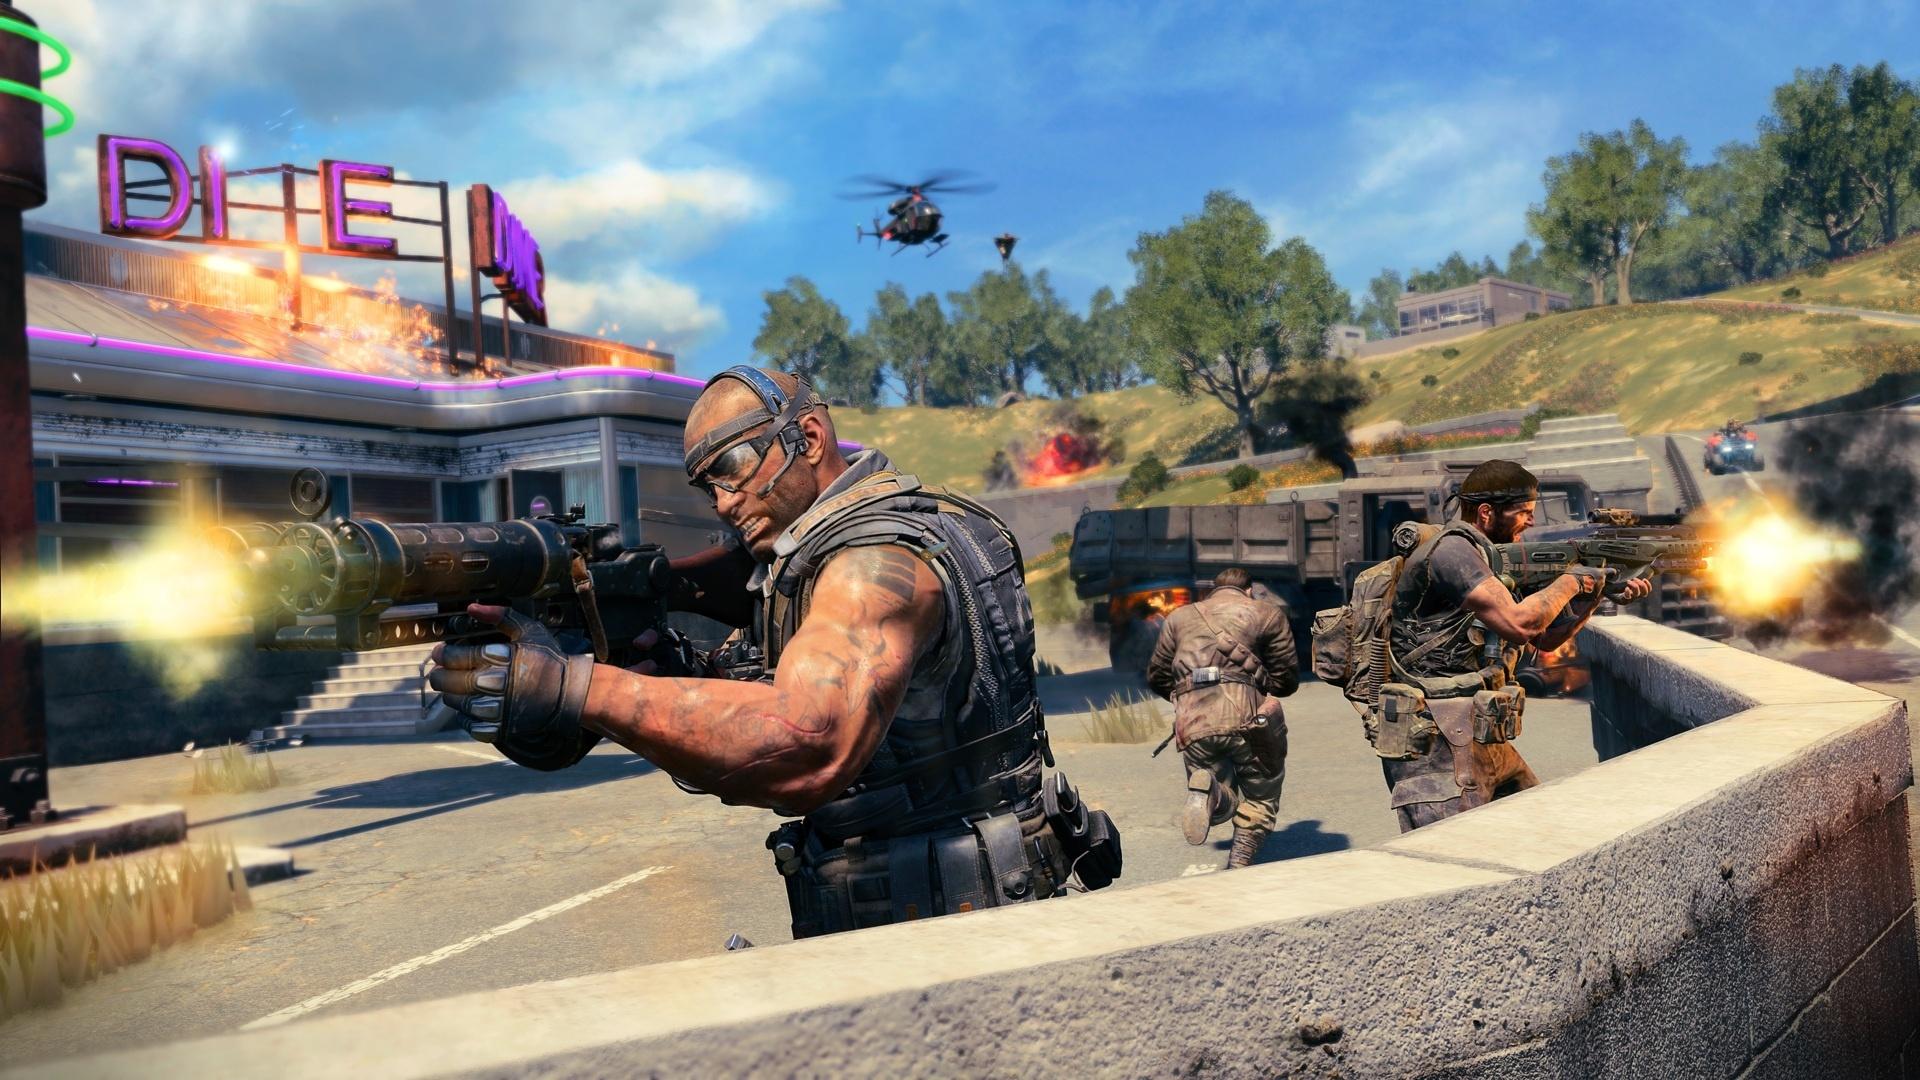 Call-of-Duty-Blackout-Best-FPS-settings-guide